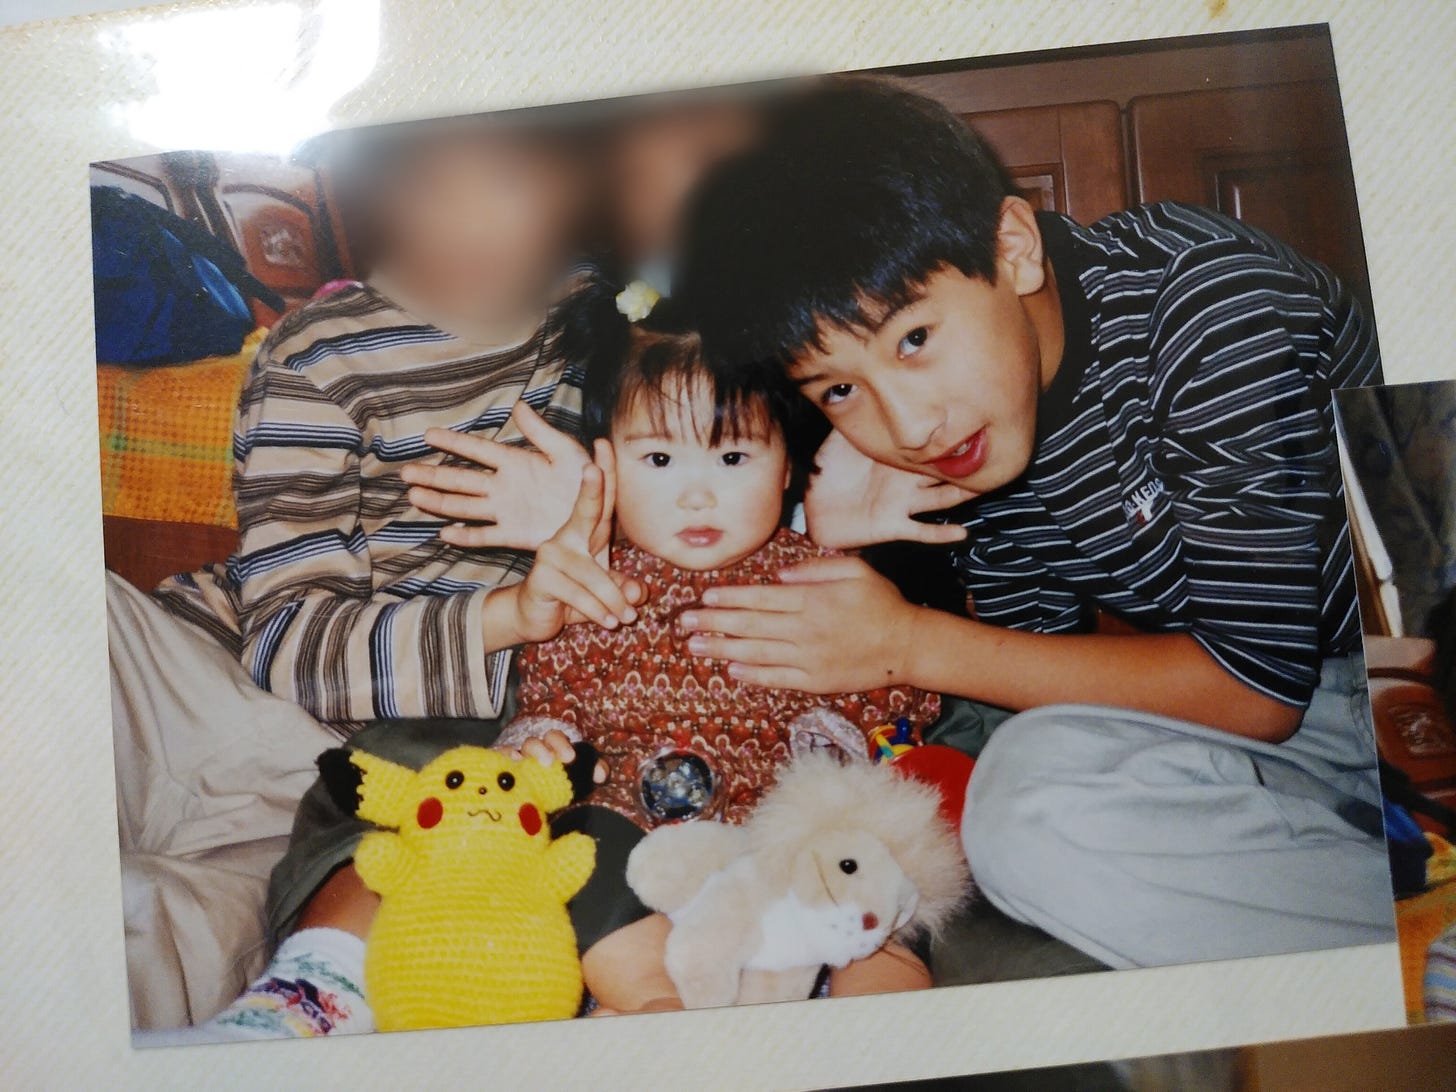 A photograph of Tsukasa (pictured right) along with his sister, with a knitted Pikachu made by his grandmother